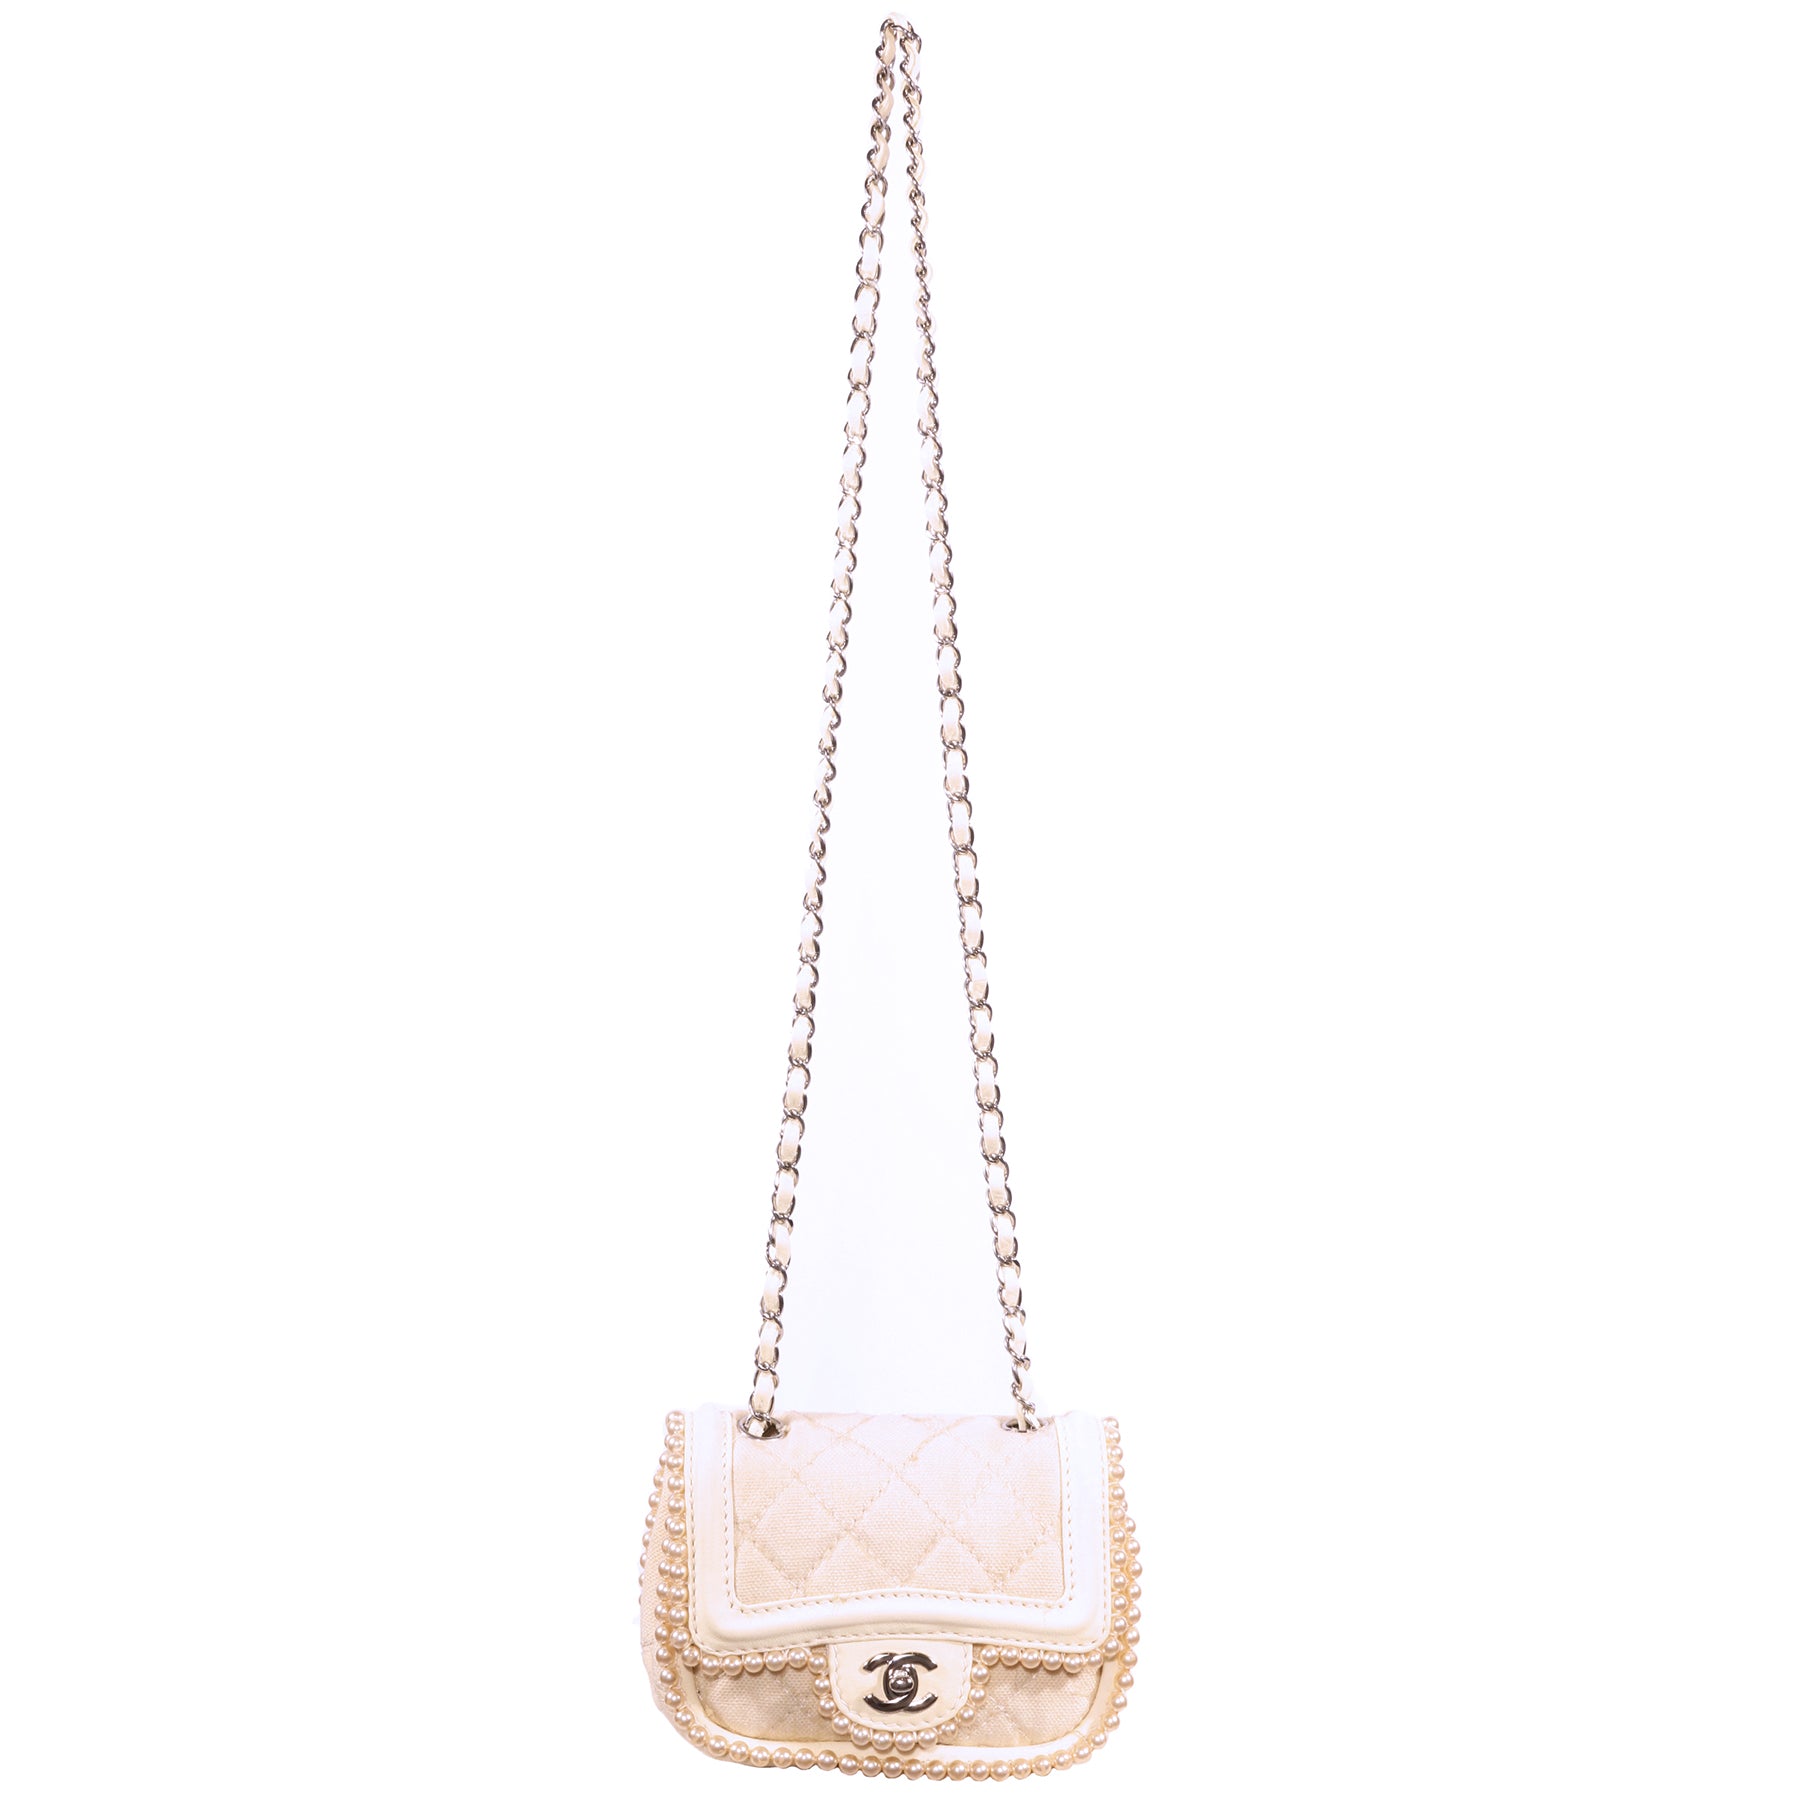 Vintage Chanel Pearl Classic Quilted Single Flap Canvas Crossbody